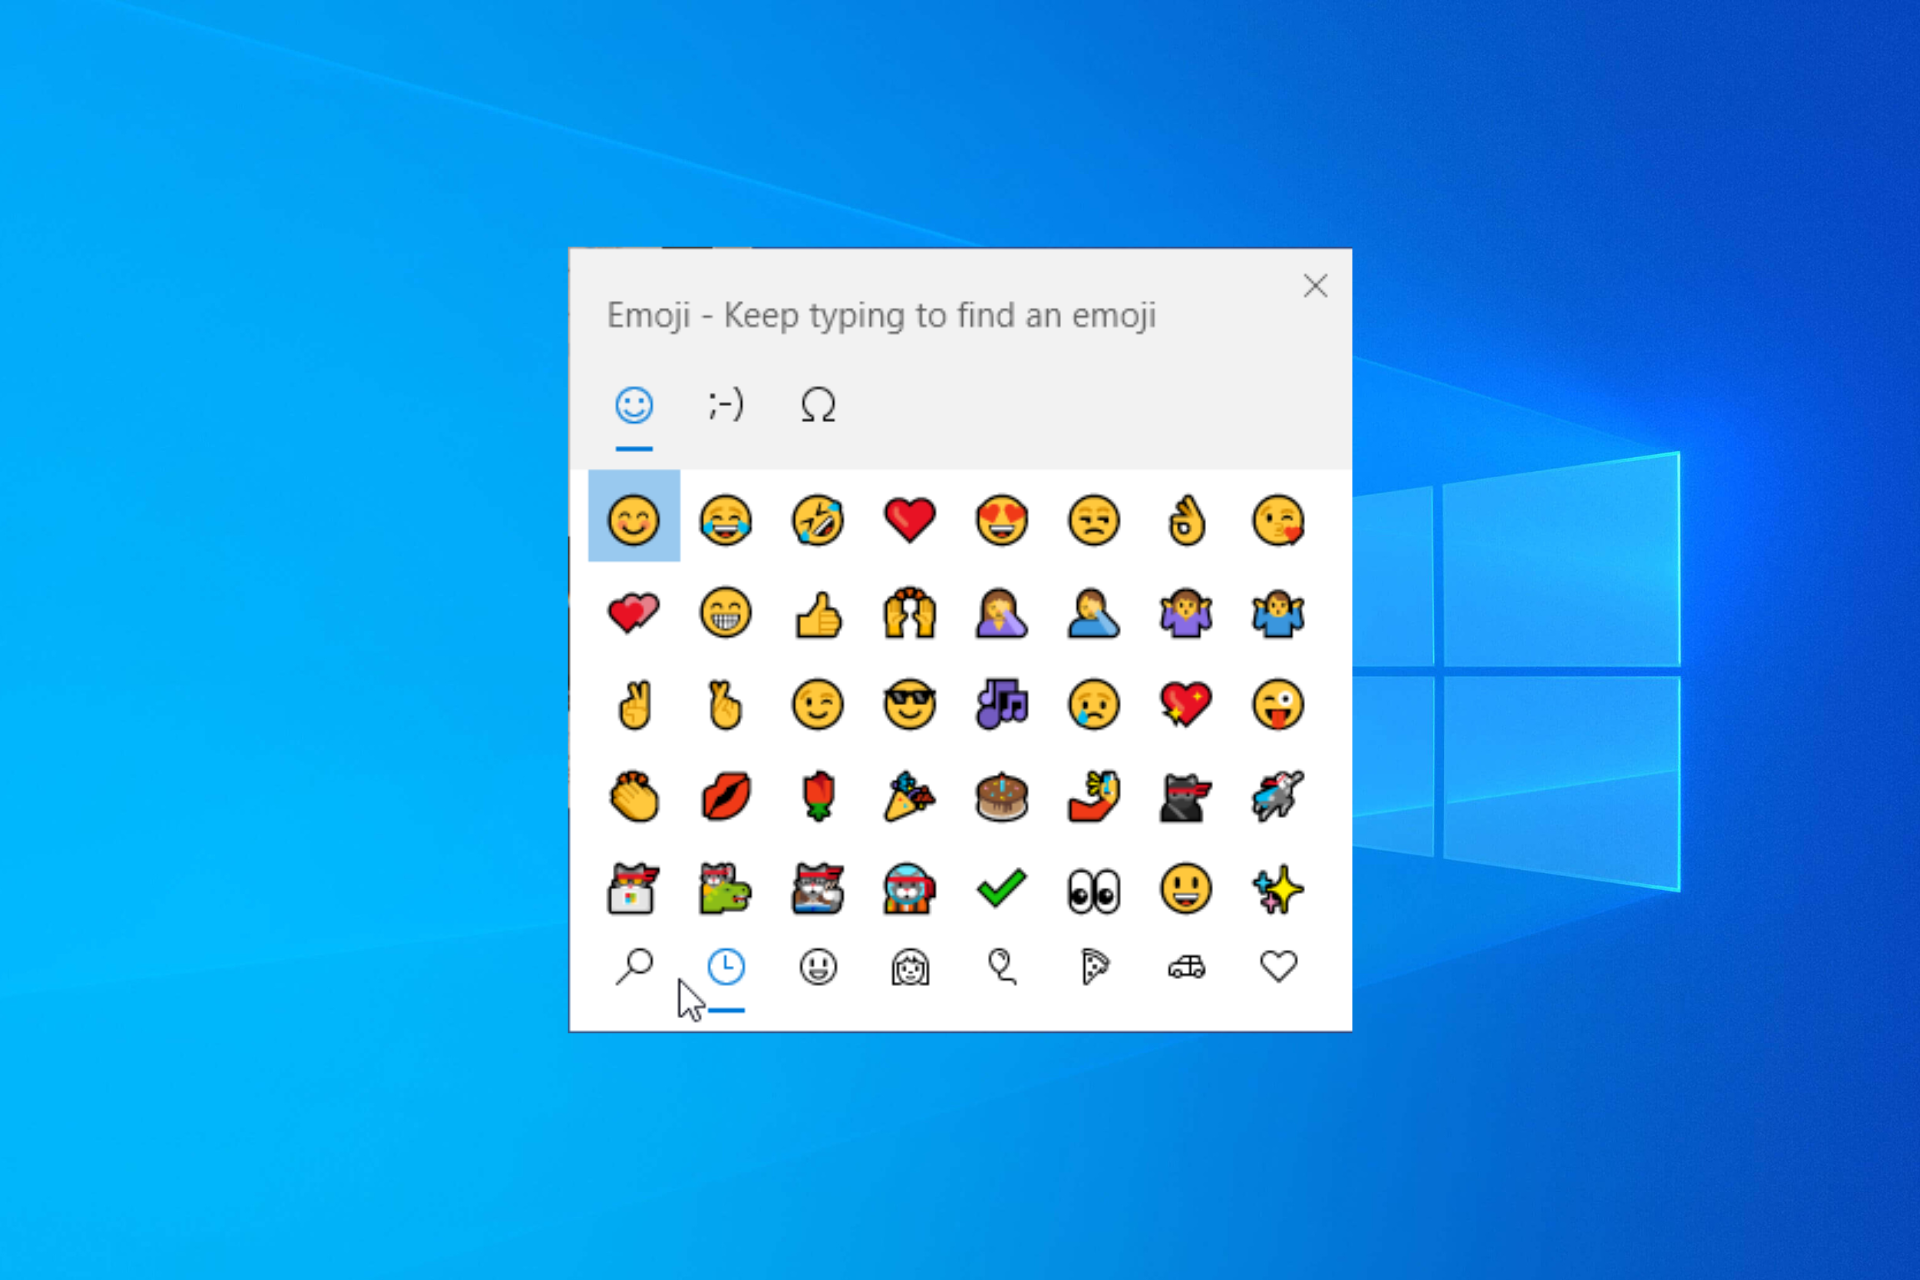 How to Open & Use the Emoji Panel on Windows 10